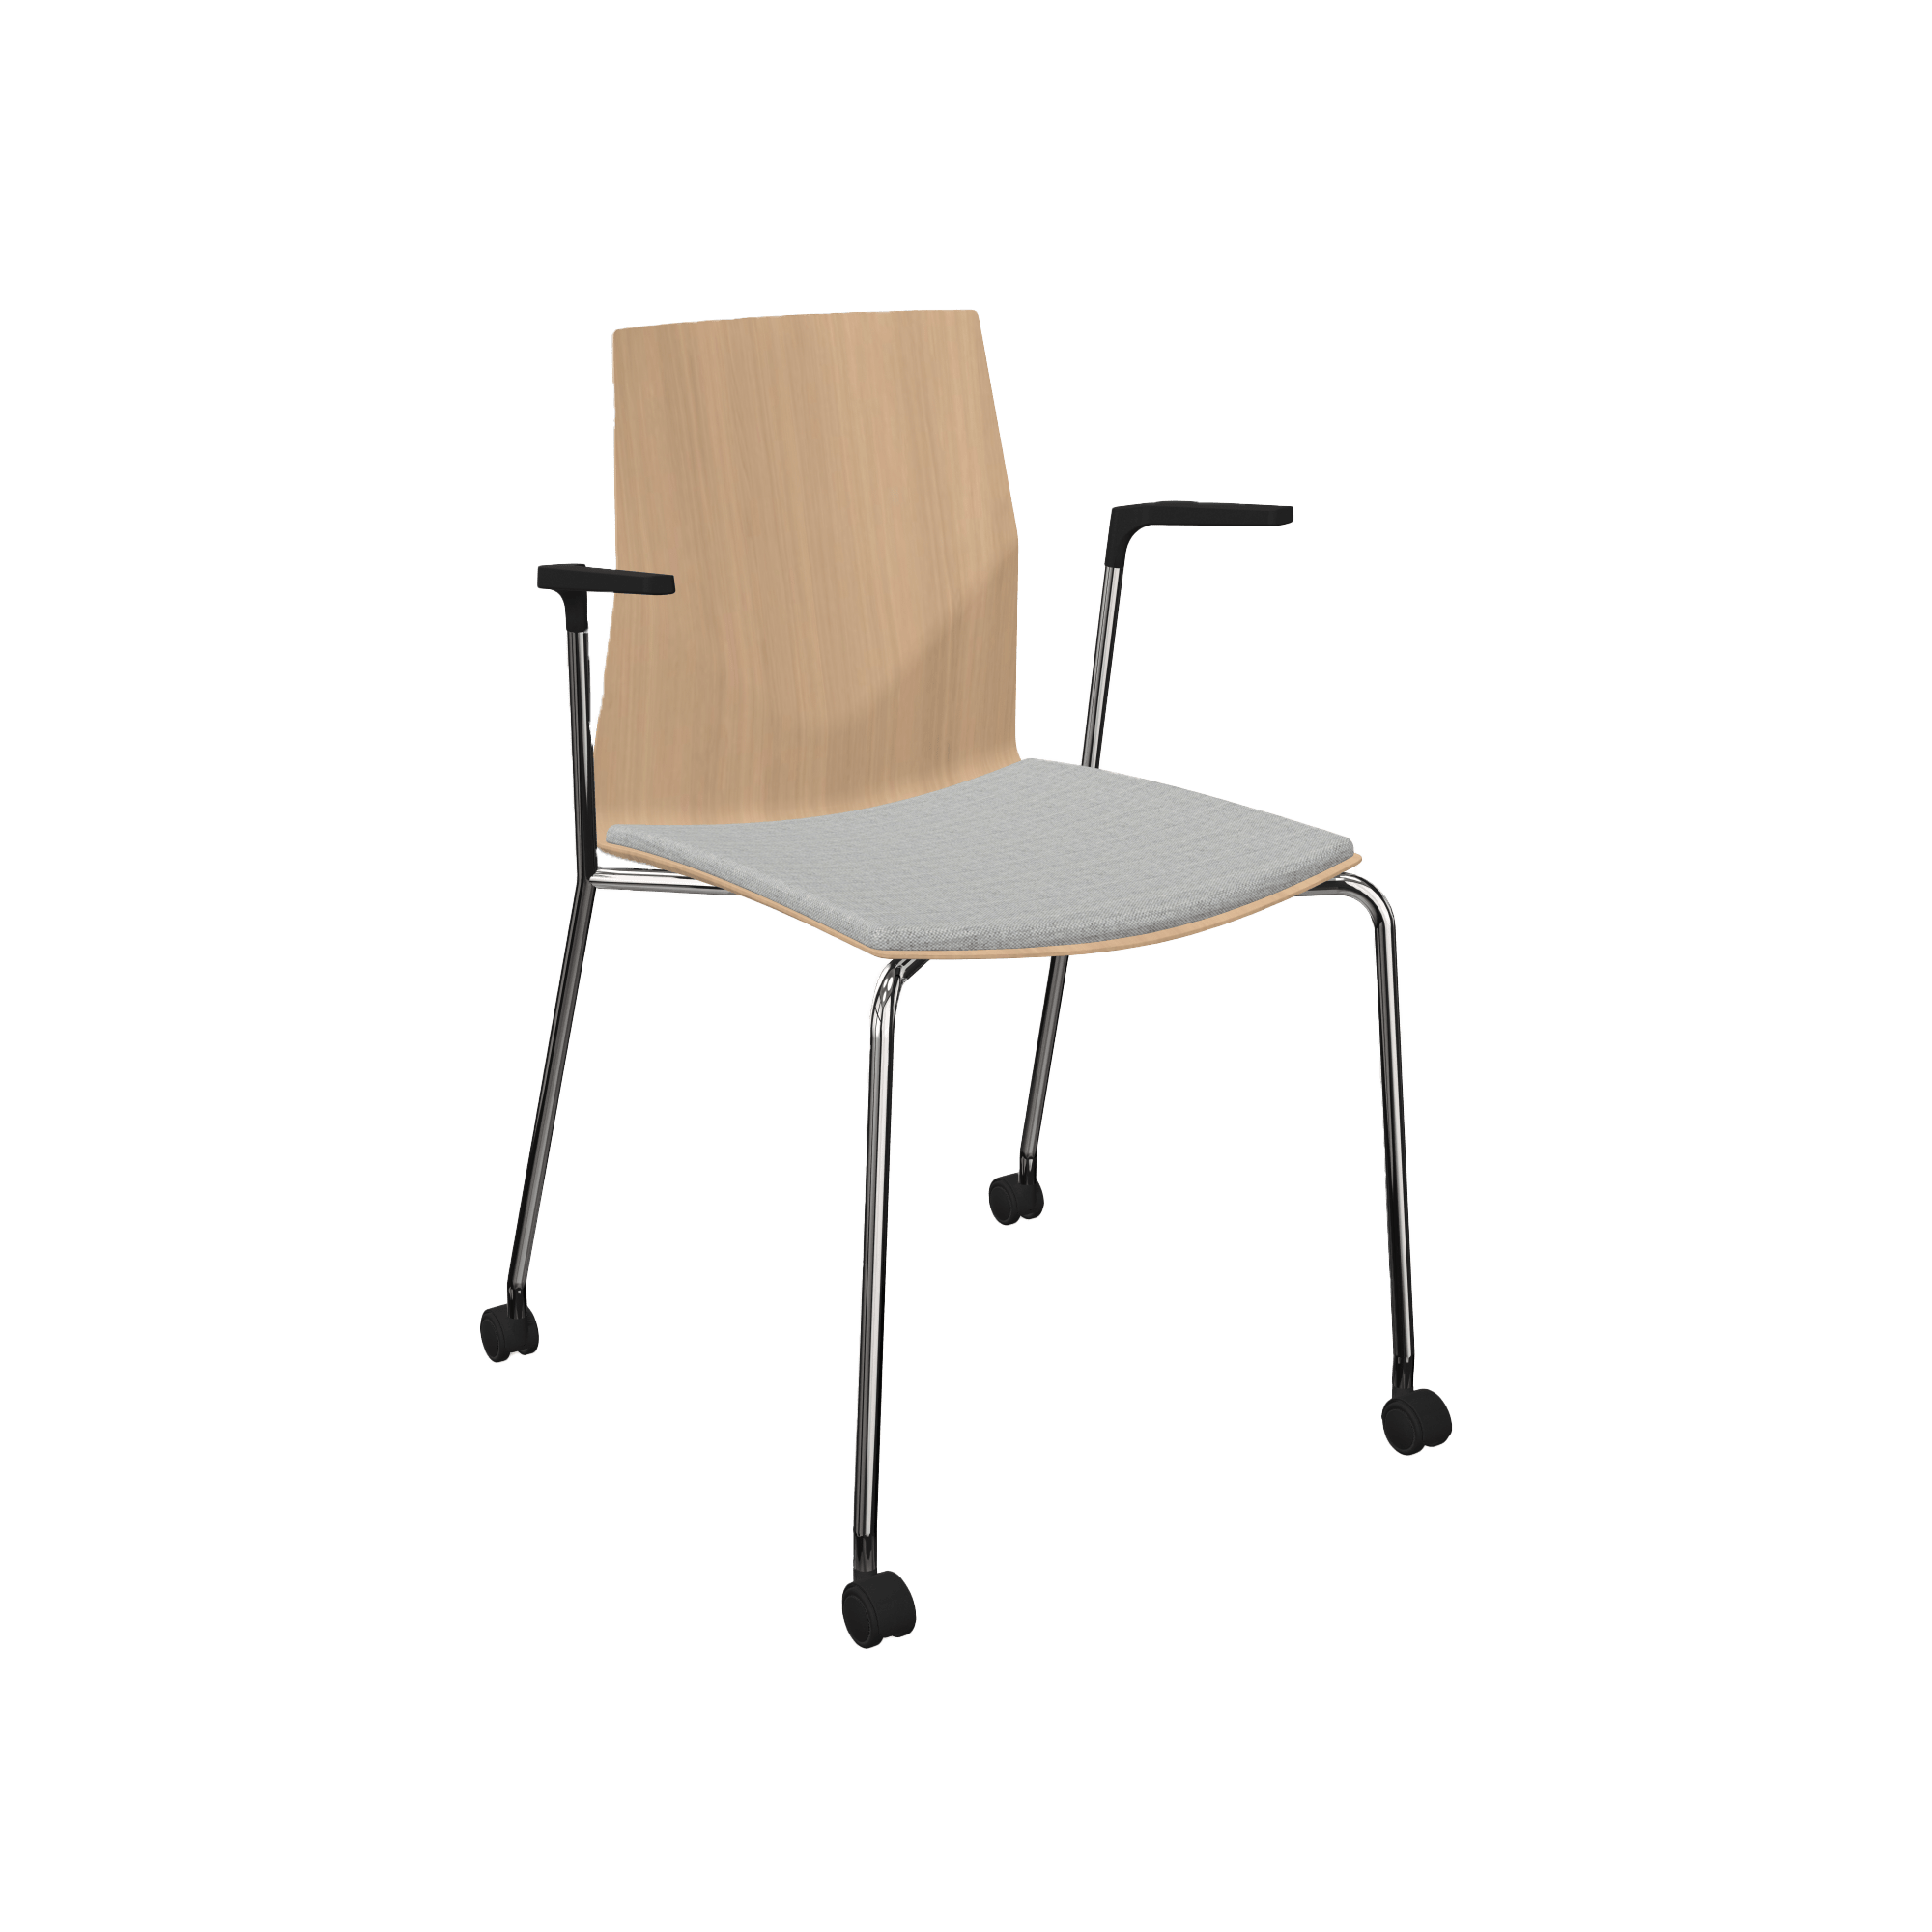 A white and wood chair with arms